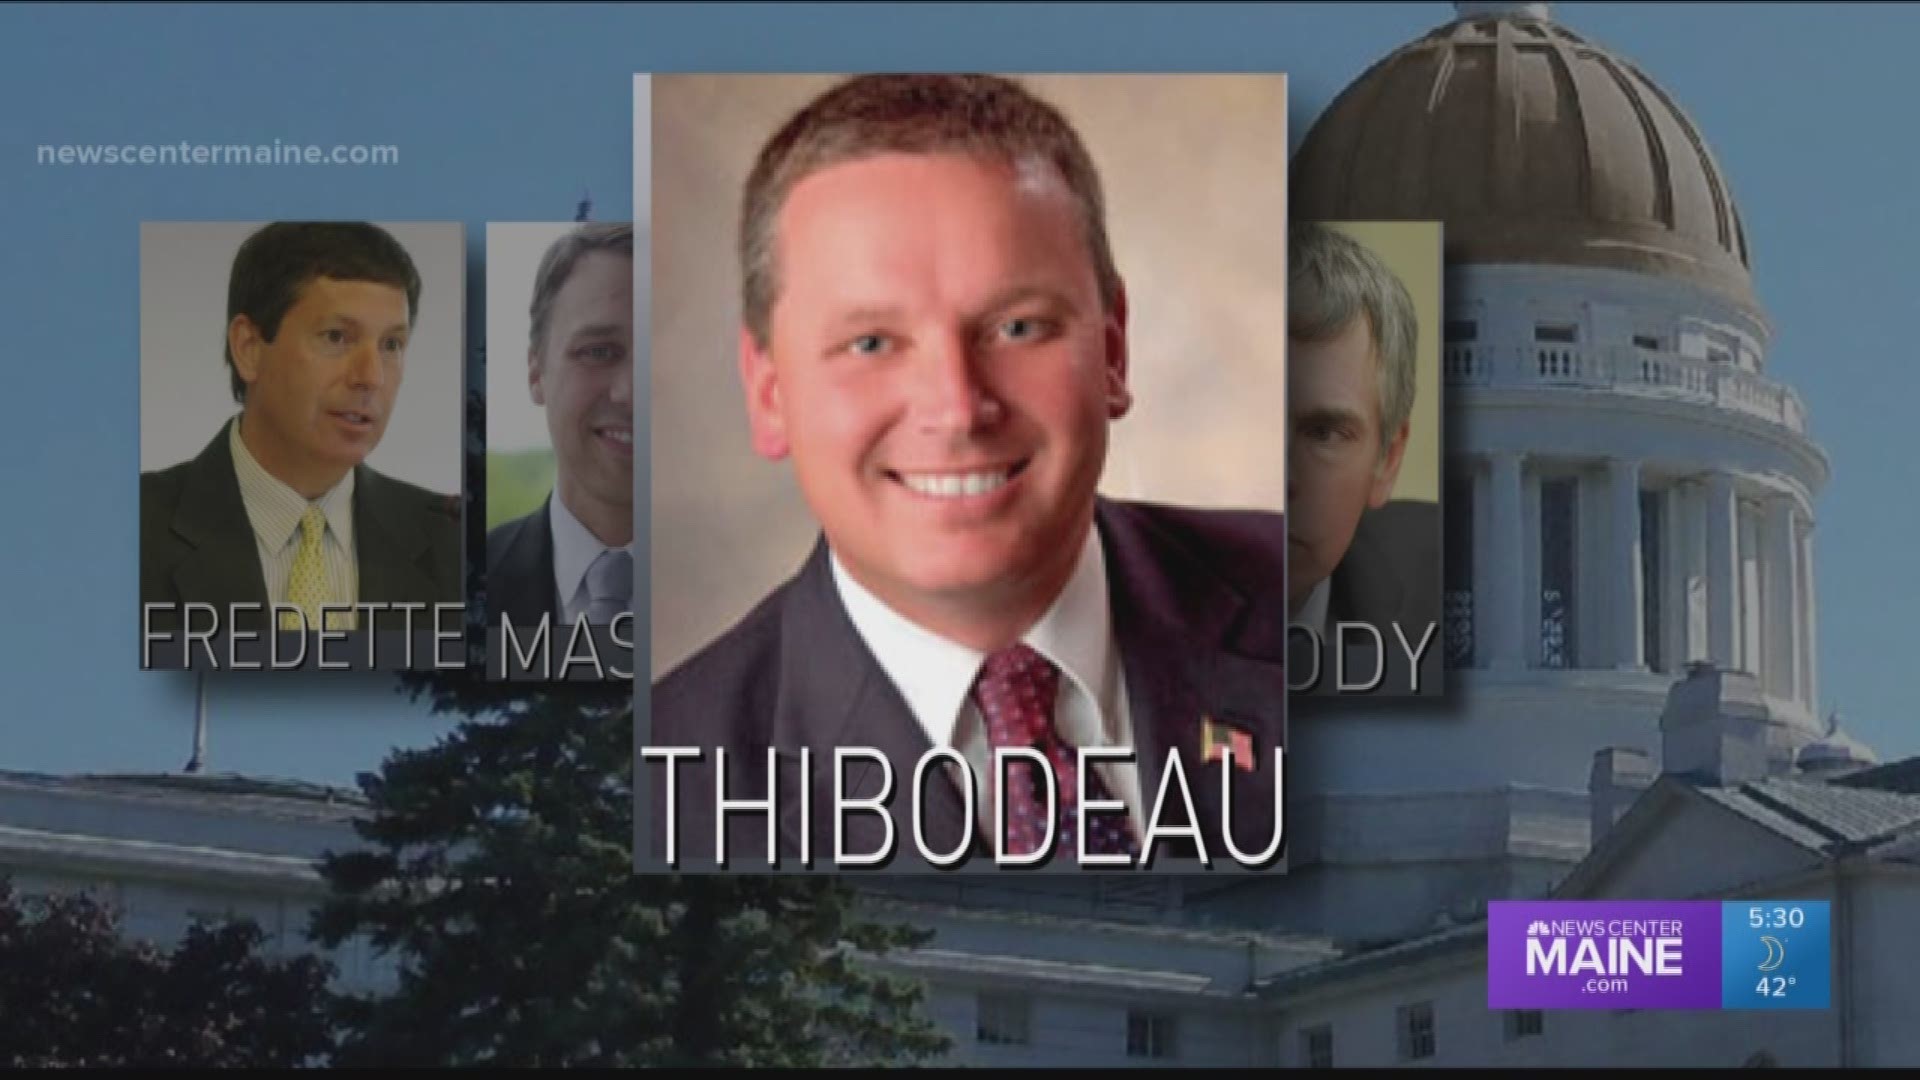 Thibodeau drops out of governor's race